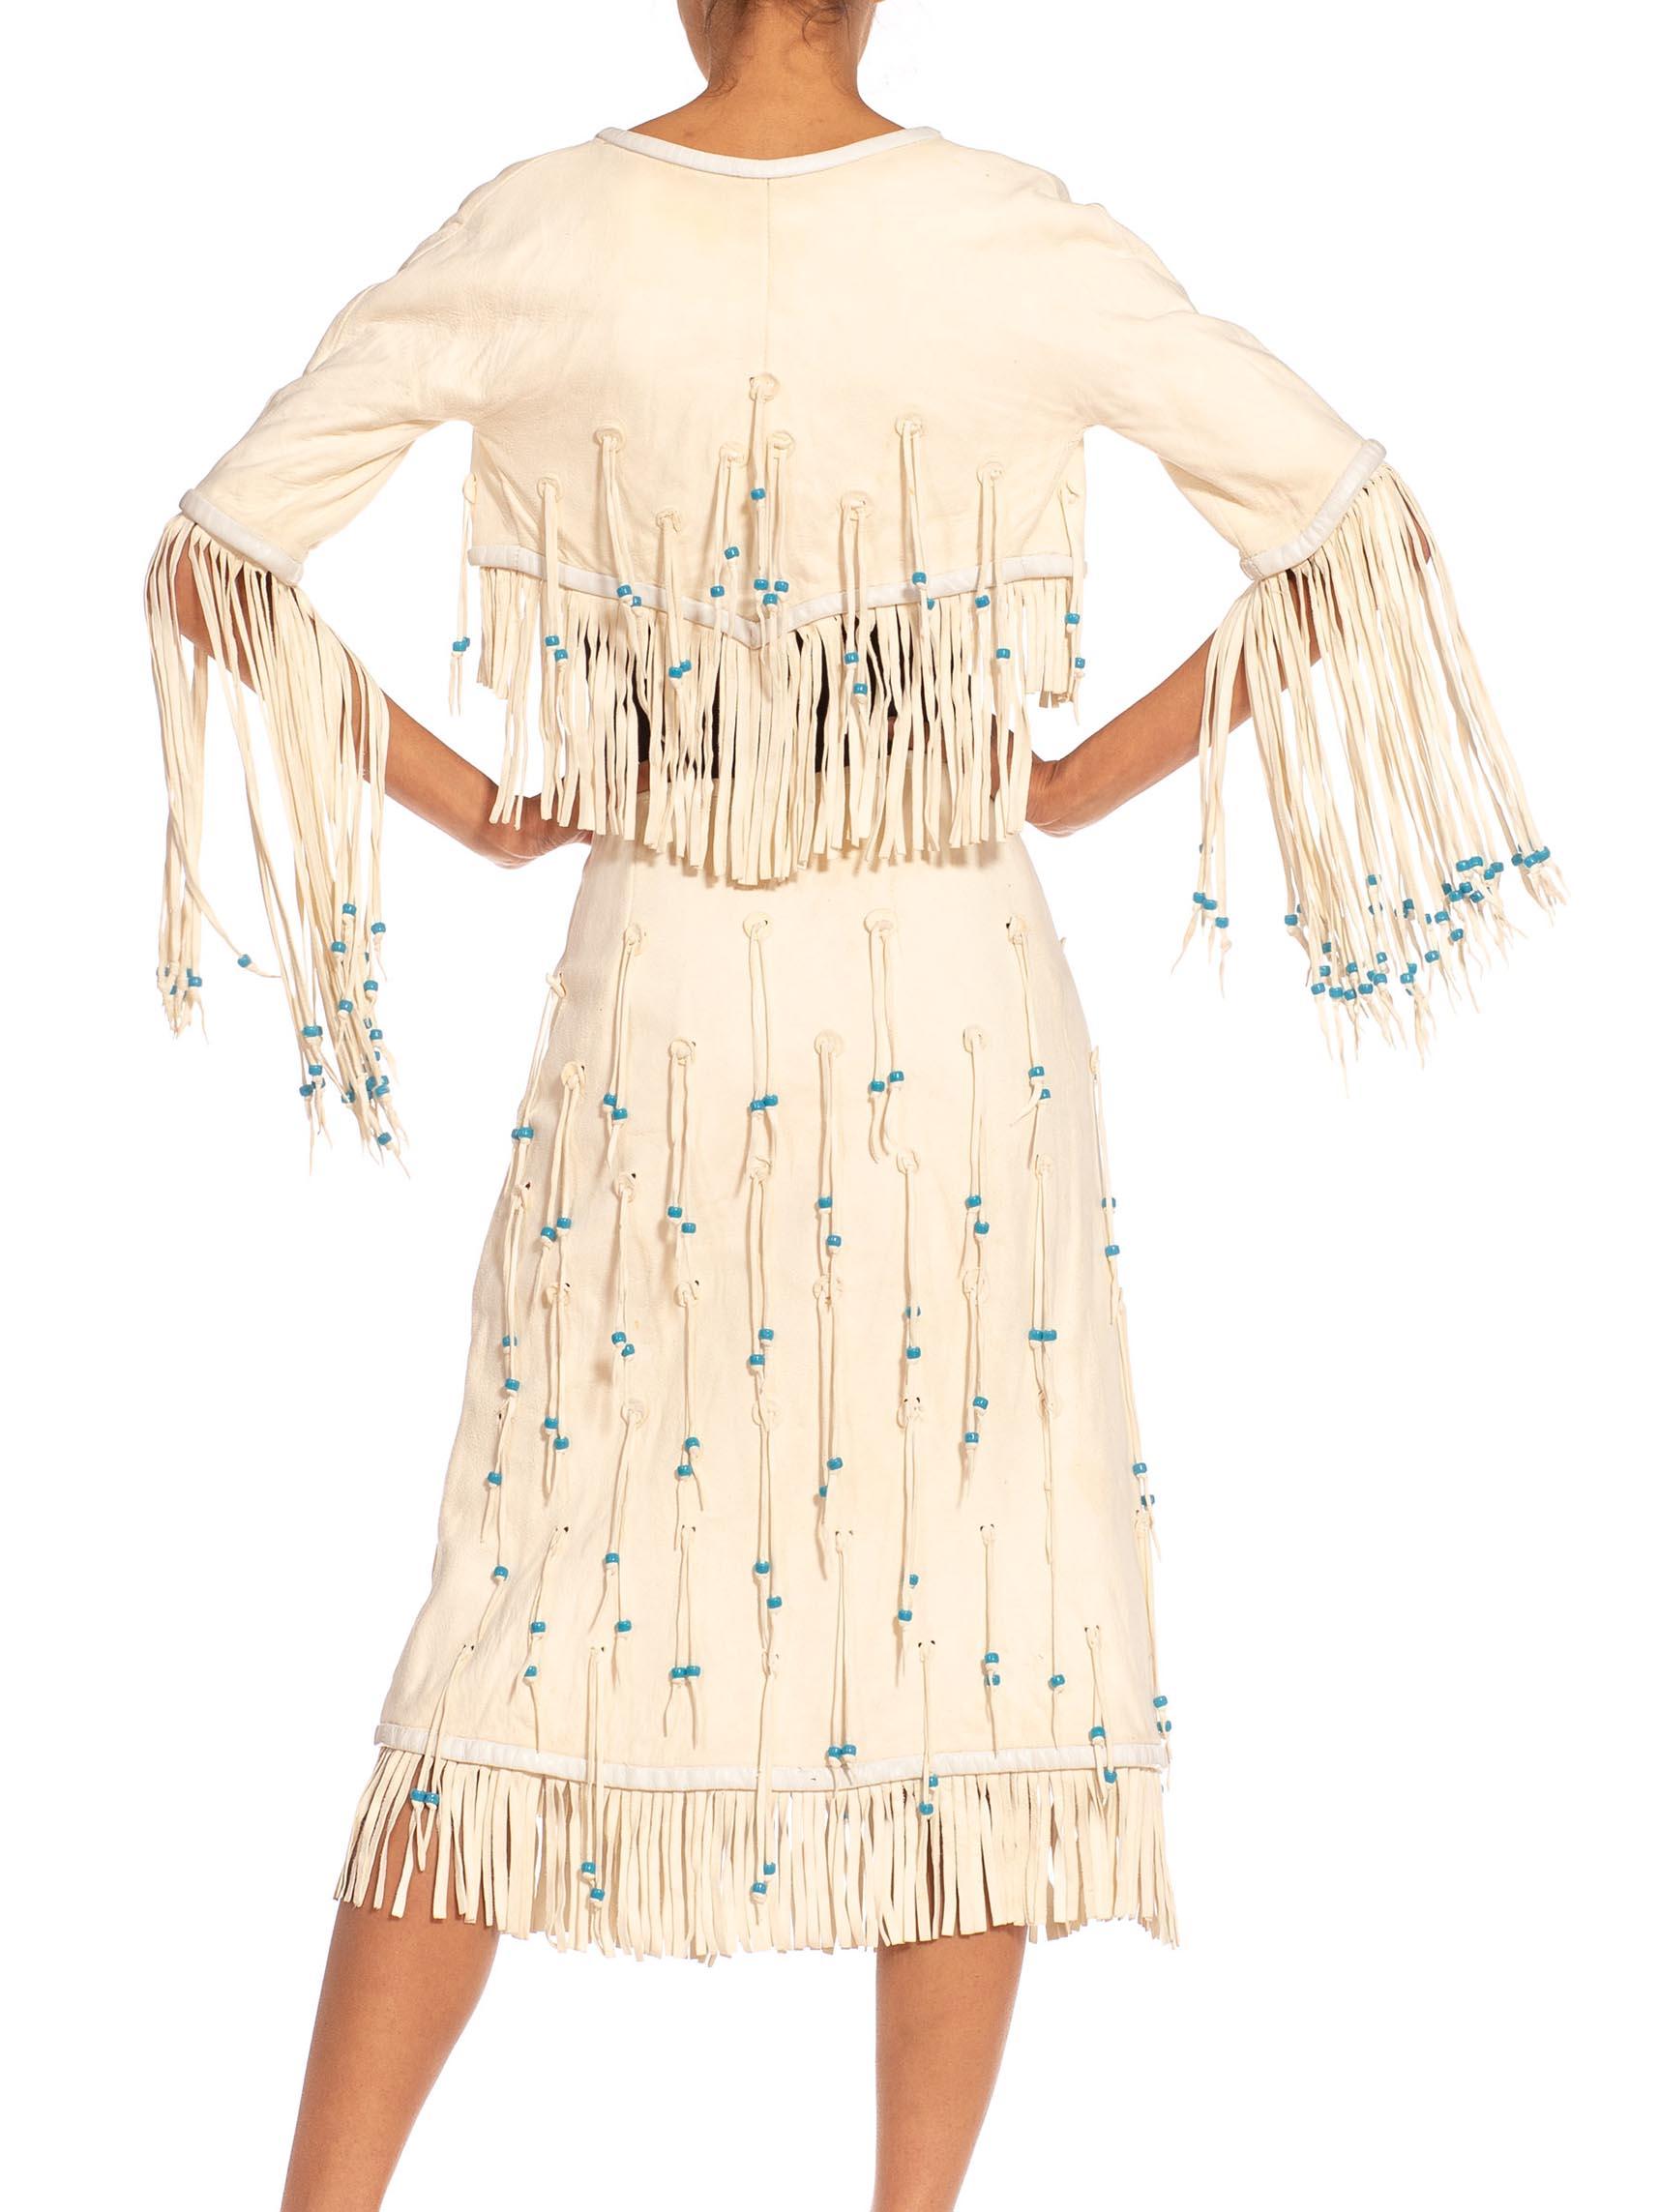 1970S GEORGIO SANT'angelo White & Blue Leather Suede Beaded Fringe Jacket Skirt For Sale 2